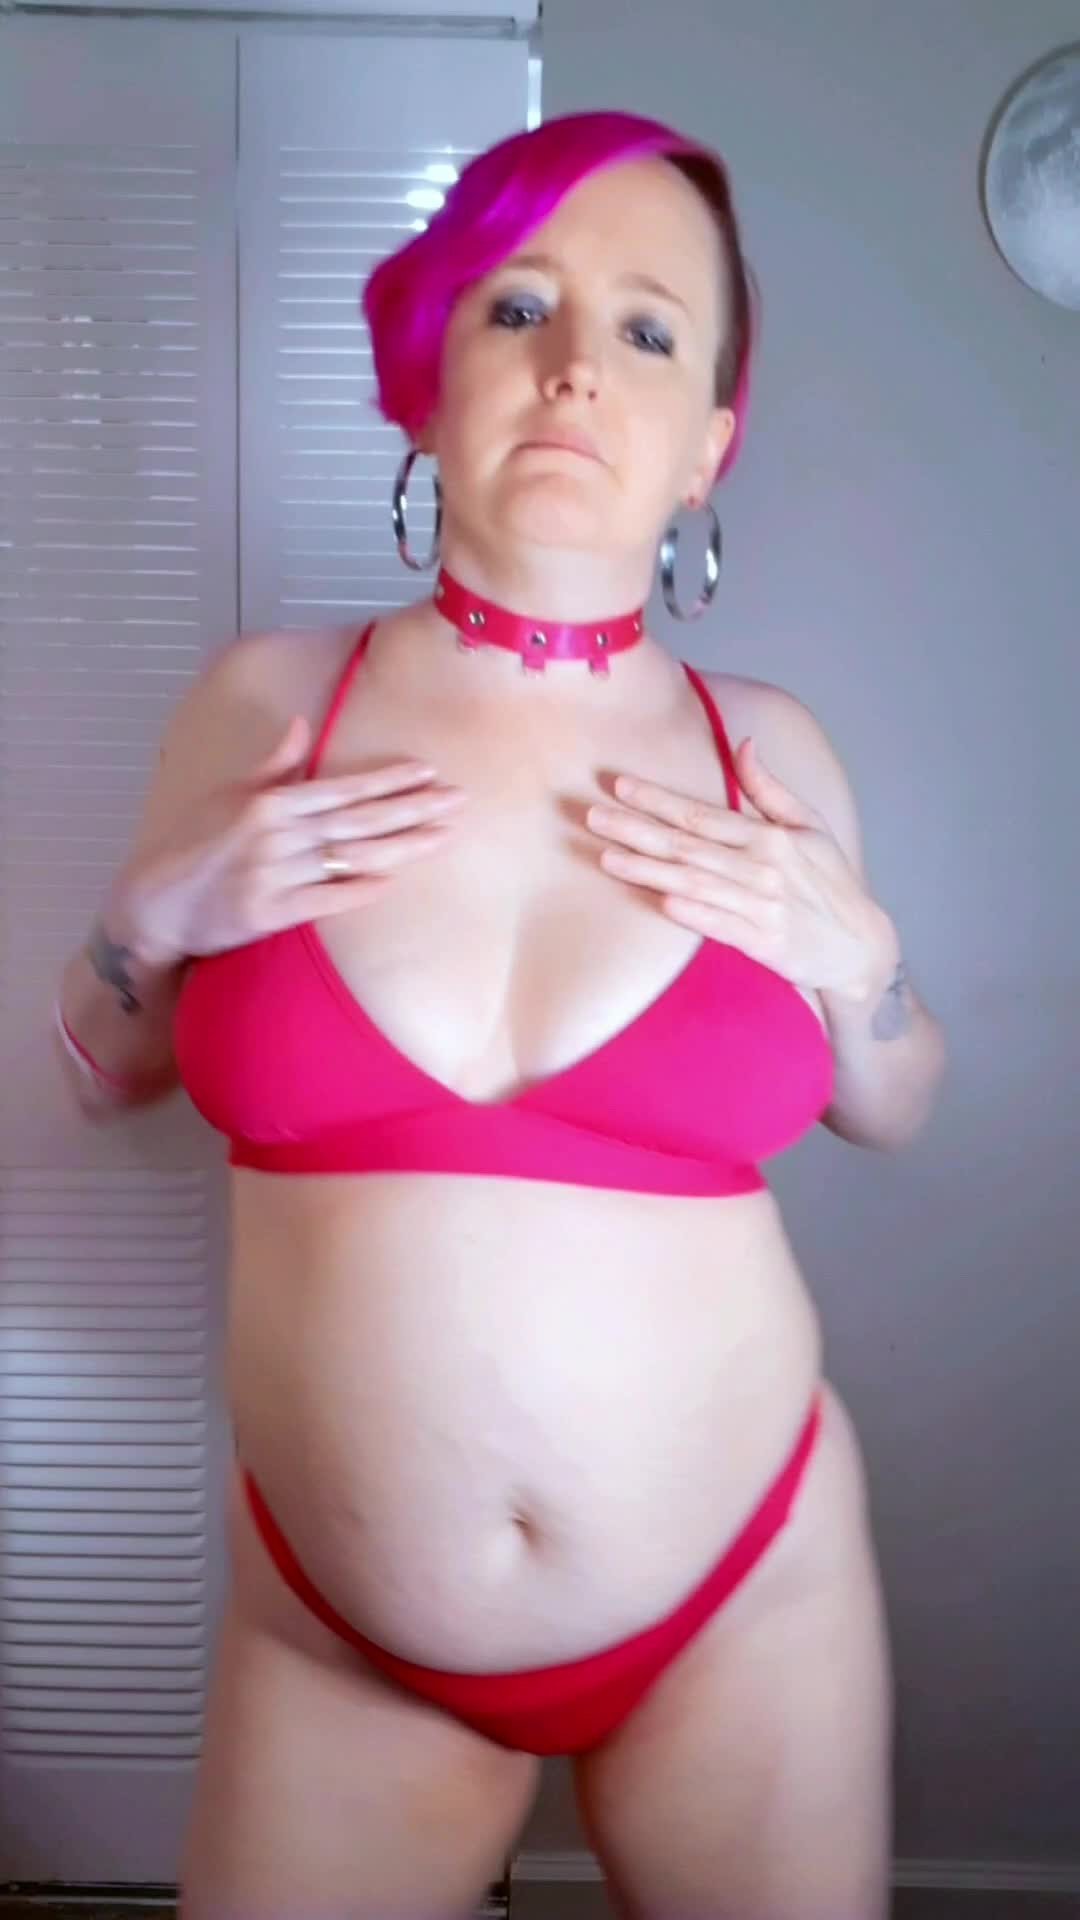 Video by Kennedy Channing with the username @kennedy36dd, who is a verified user,  April 30, 2024 at 2:46 AM. The post is about the topic MILF and the text says 'New content posted daily on my ONLYFANS. Cum see, I'll be waiting, you dirty little freak 😘

💙🤍
https://onlyfans/kennedy36dd

🖤💜Manyvids.com Kennedy Channing

#kennedy36dd
#manyvids #picoftheday #milf #curvy #curves #thicc #booty #babe #sexy..'